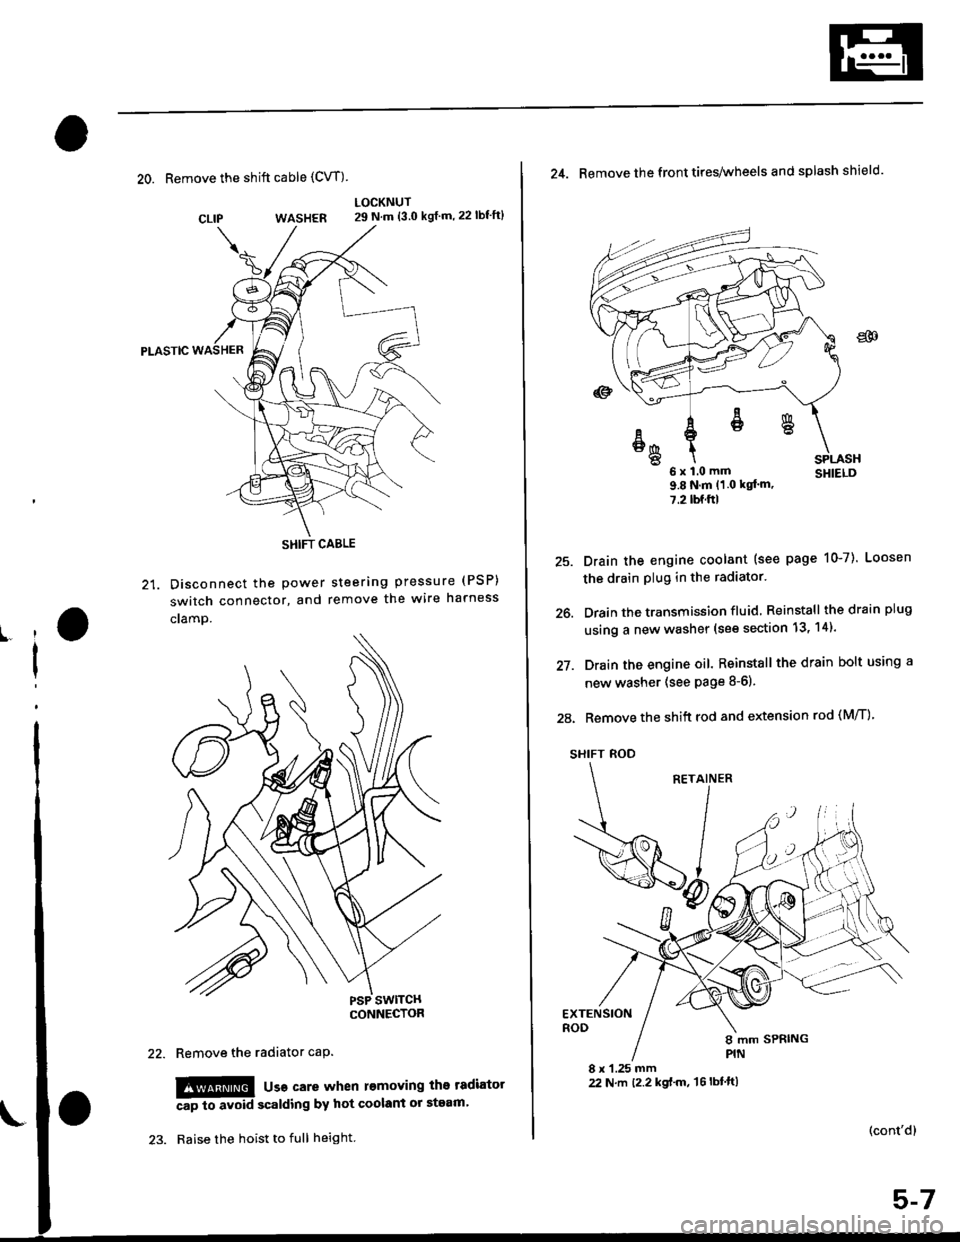 HONDA CIVIC 2000 6.G User Guide 20. Remove the shift cable (CVT)
WASHER
Pt-Aslc
21. Disconnect the Power
switch connector, and
cramp.
LOCKNUT29 N.m {3.0 kgf m,22lbfft}
steering pressure (PSP)
remove the wire harness
CLIP
ll
I
Remov